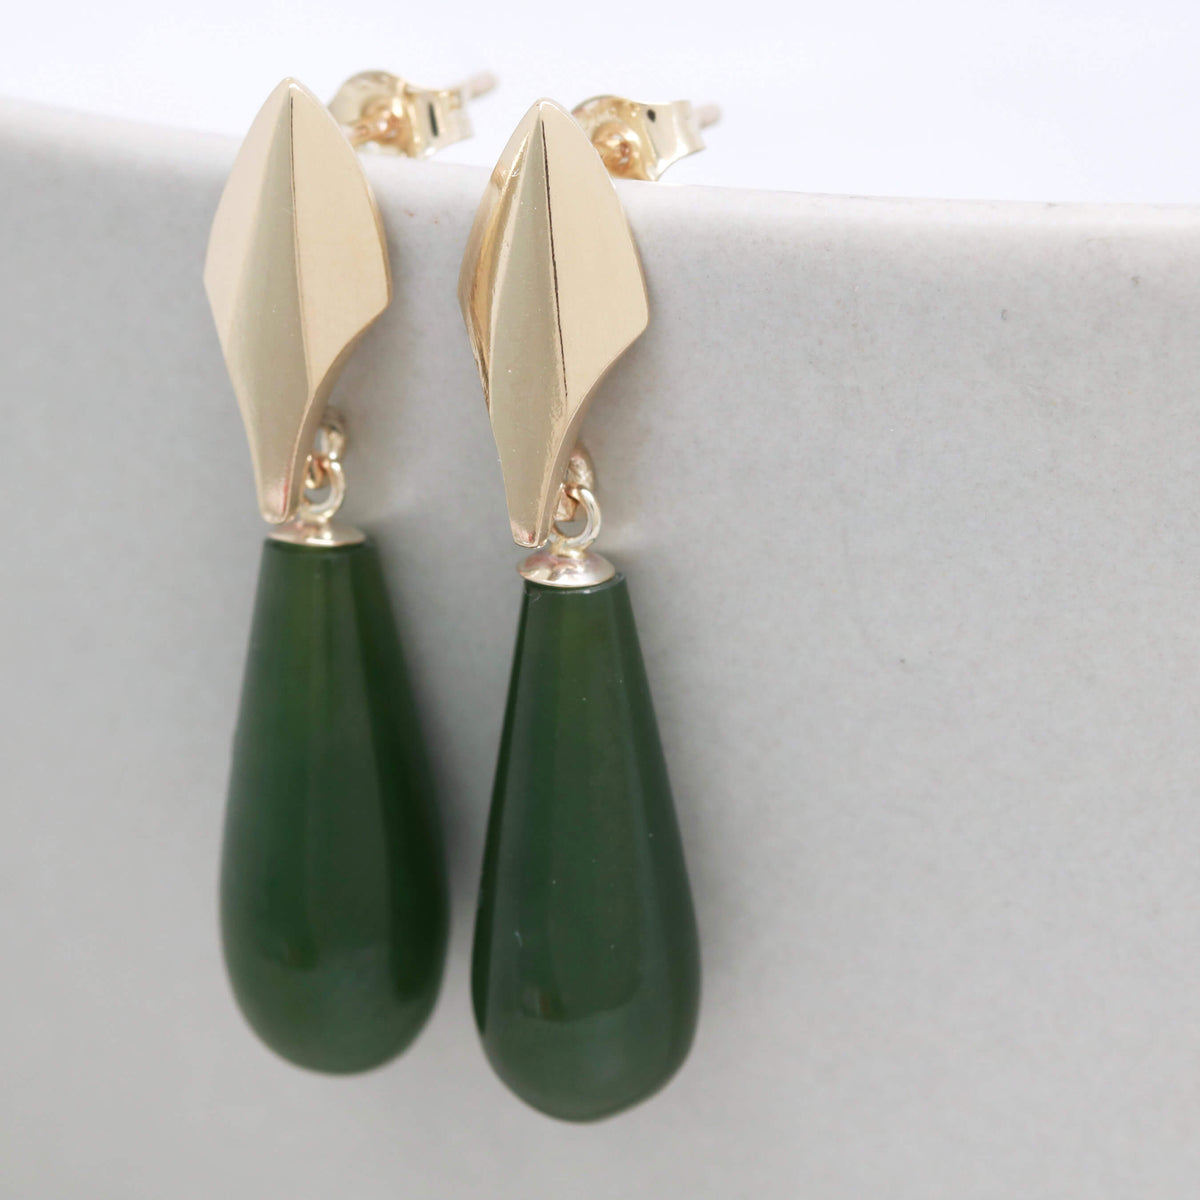 9ct Gold Deco Dropper Earrings with Nephrite